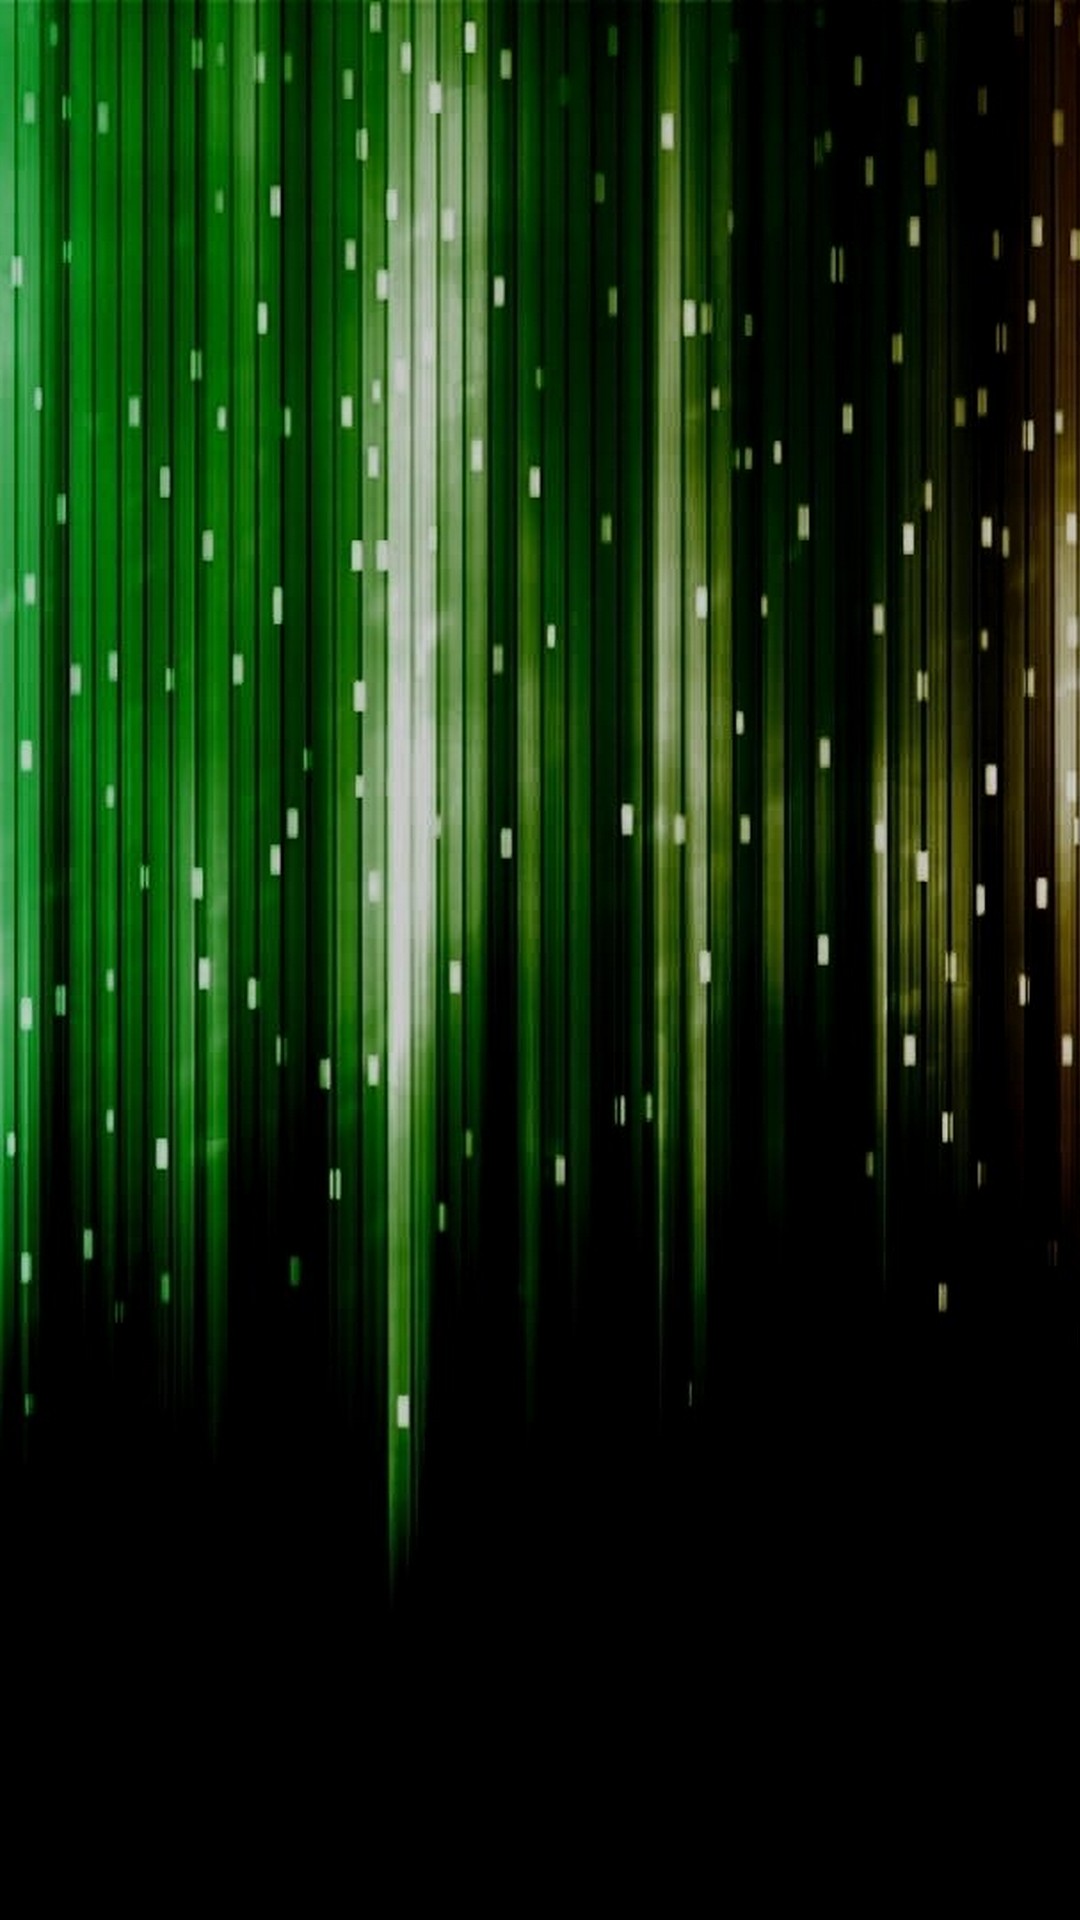 Wallpaper Black and Green Android with image resolution 1080x1920 pixel. You can make this wallpaper for your Android backgrounds, Tablet, Smartphones Screensavers and Mobile Phone Lock Screen